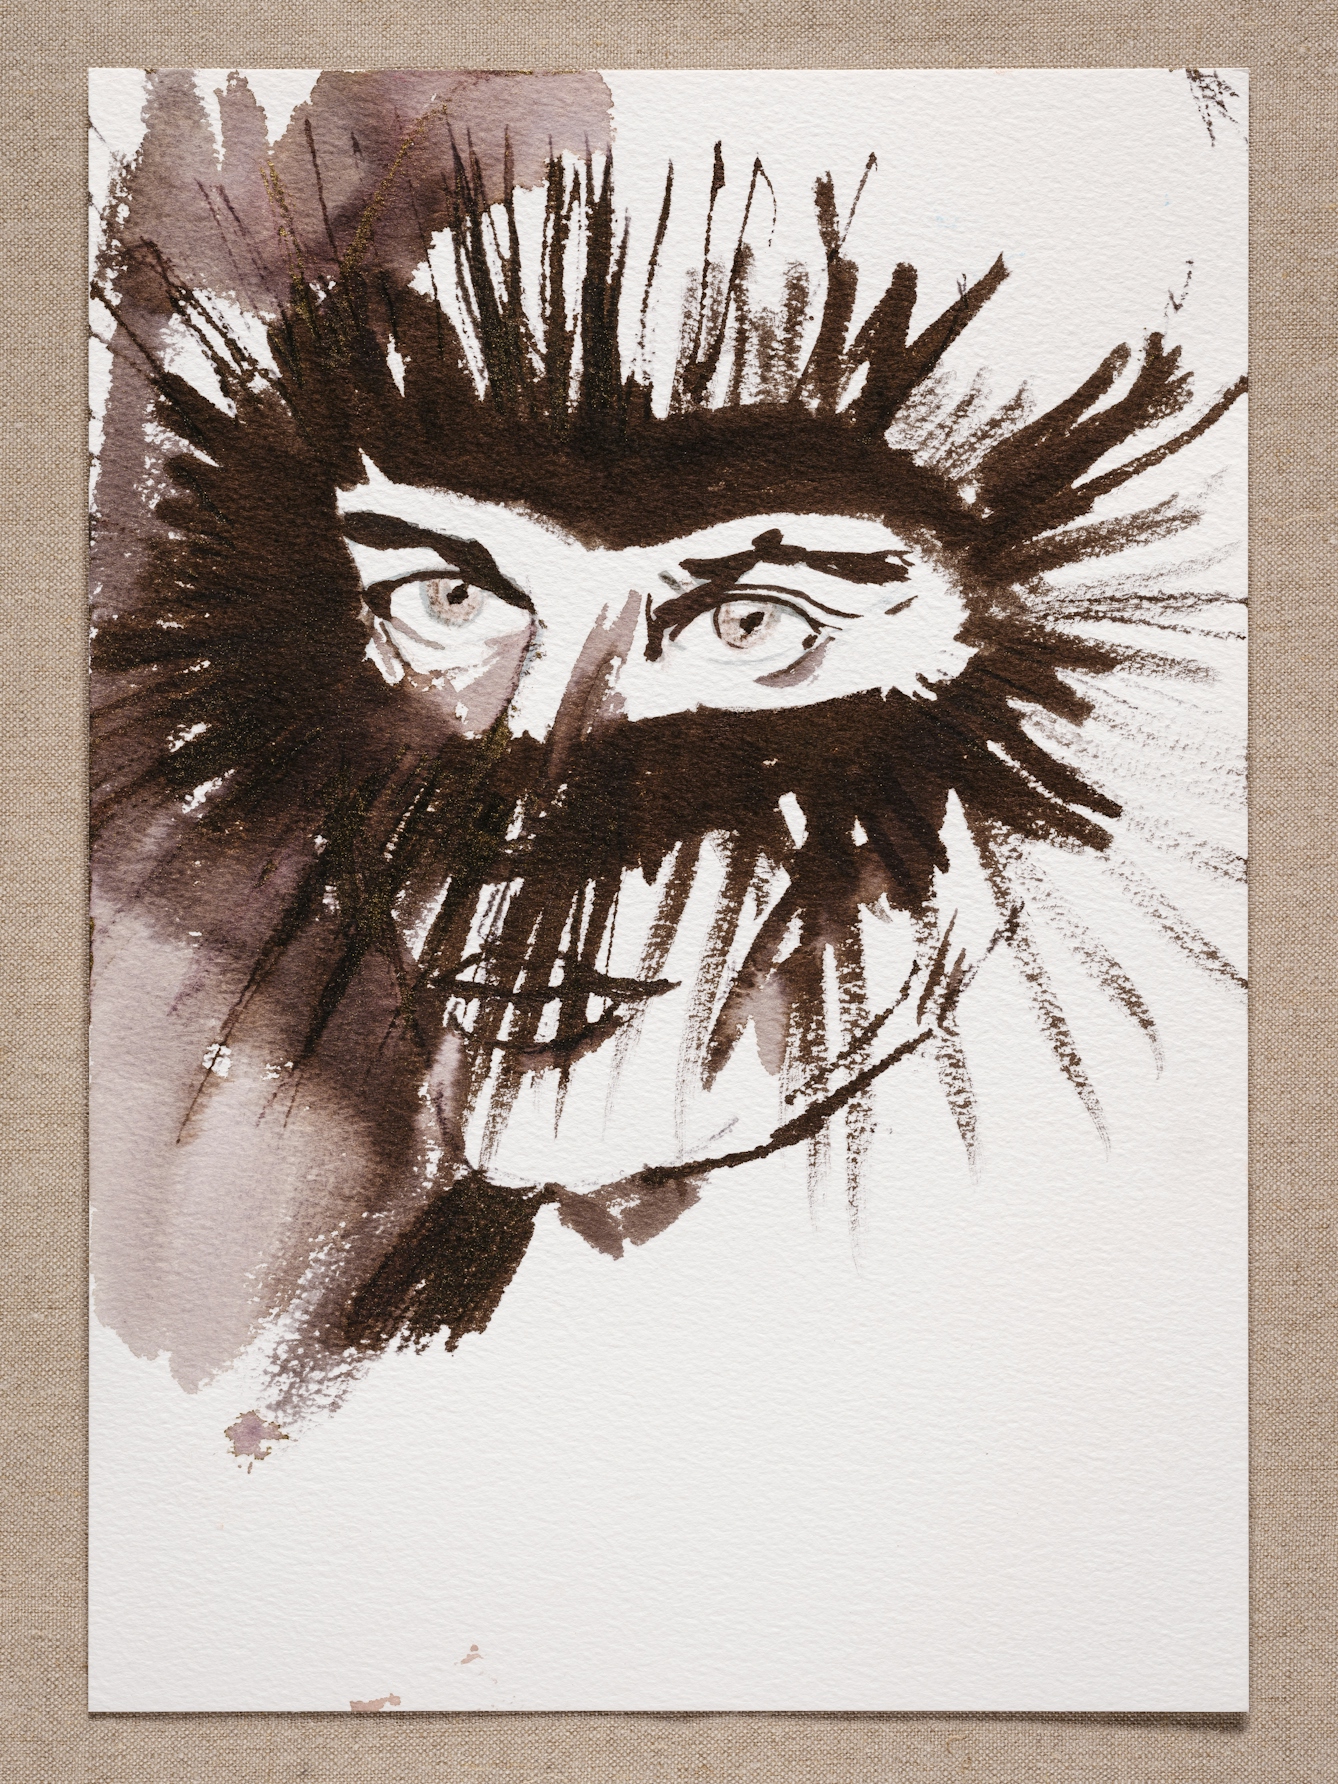 Watercolour painting resting on a brown fabric background. The watercolour shows a face painted in brown tones. A ring of streaks radiates from the eyes, accentuating their presence.